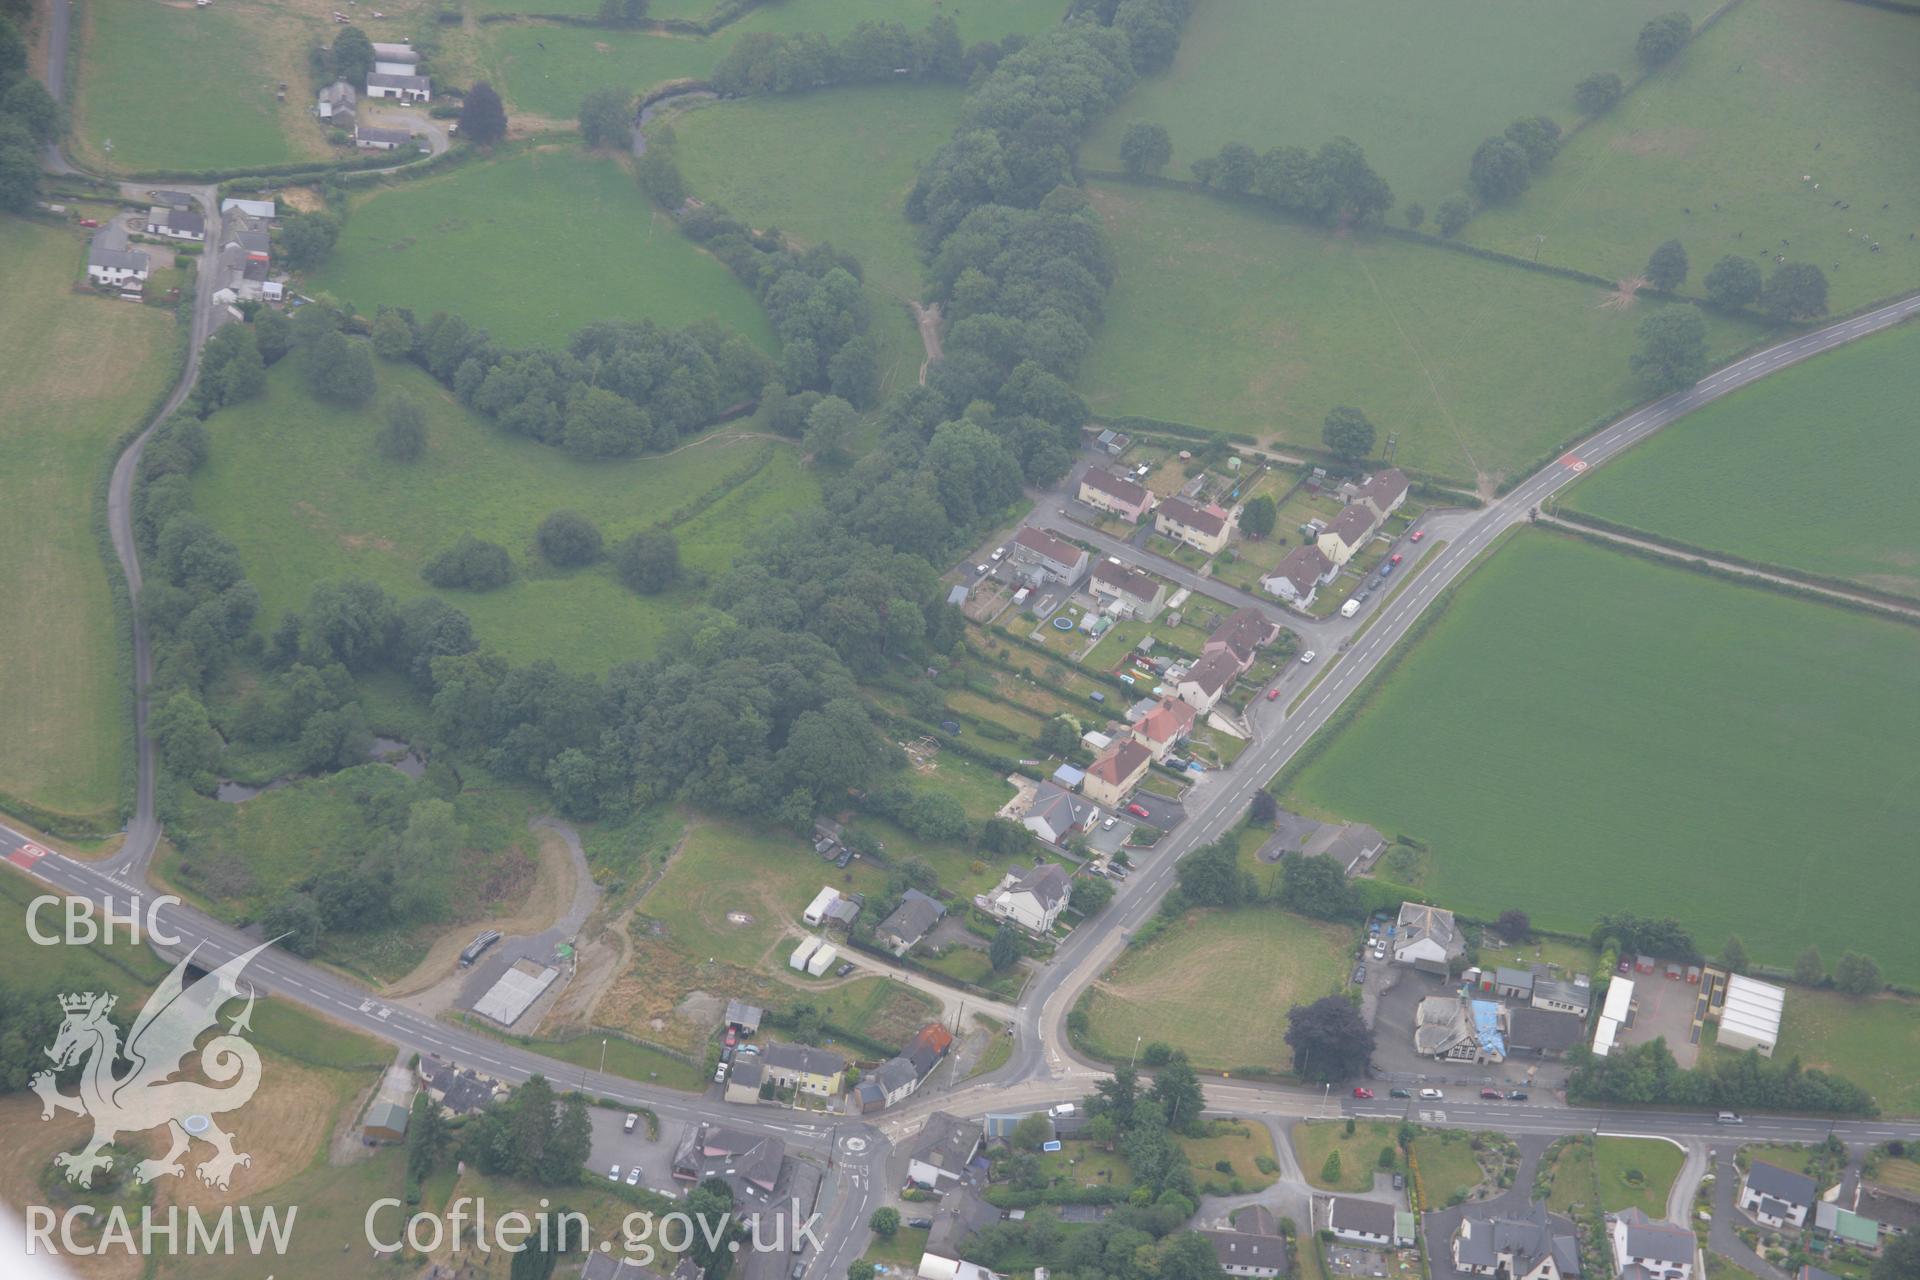 RCAHMW colour oblique aerial photograph of Llanwnnen Castle. Taken on 21 July 2006 by Toby Driver.